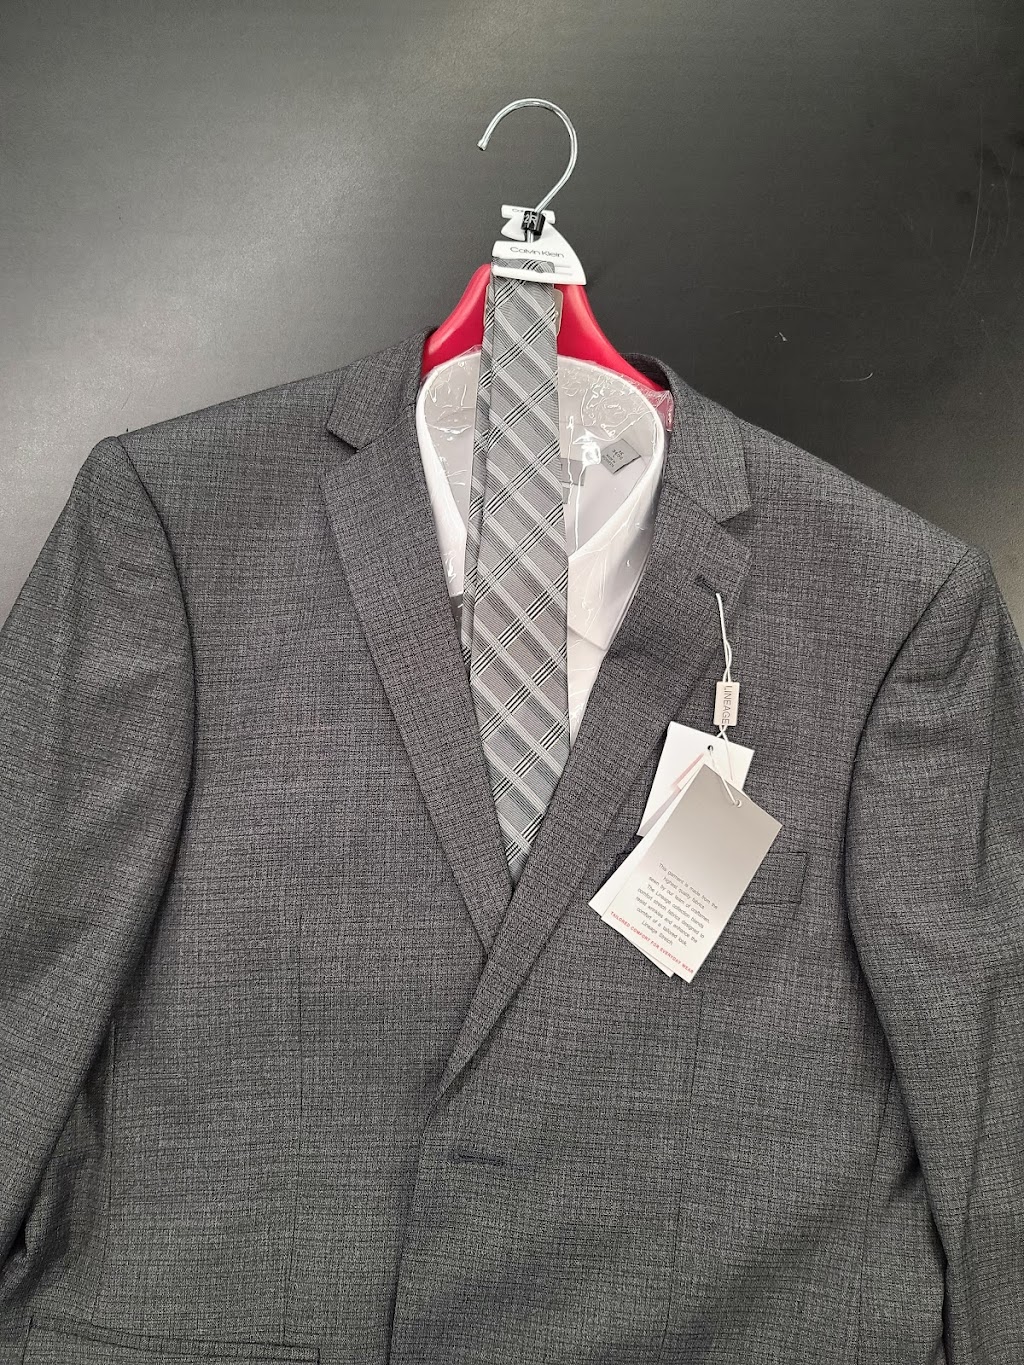 Westborn Tailors & Cleaners | 22668 Michigan Ave, Dearborn, MI 48124, USA | Phone: (313) 274-5300